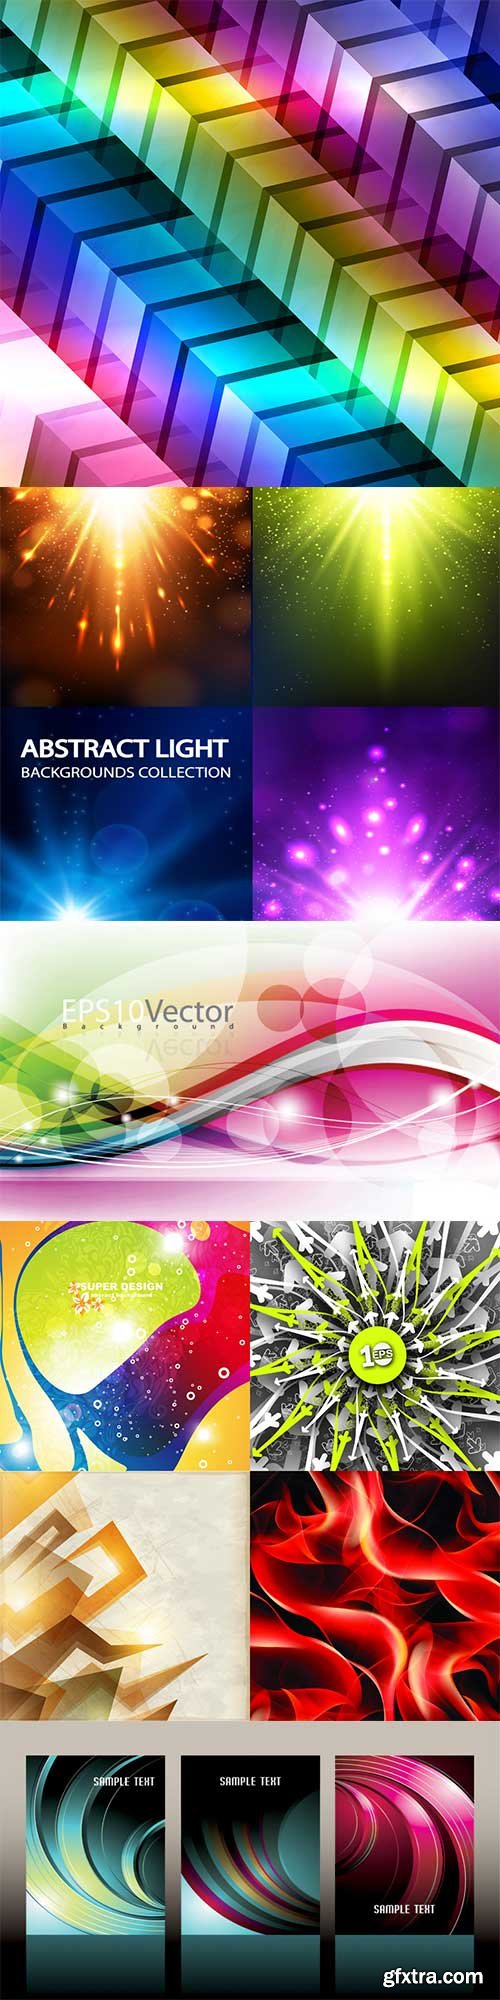 Bright colorful abstract backgrounds vector - 62